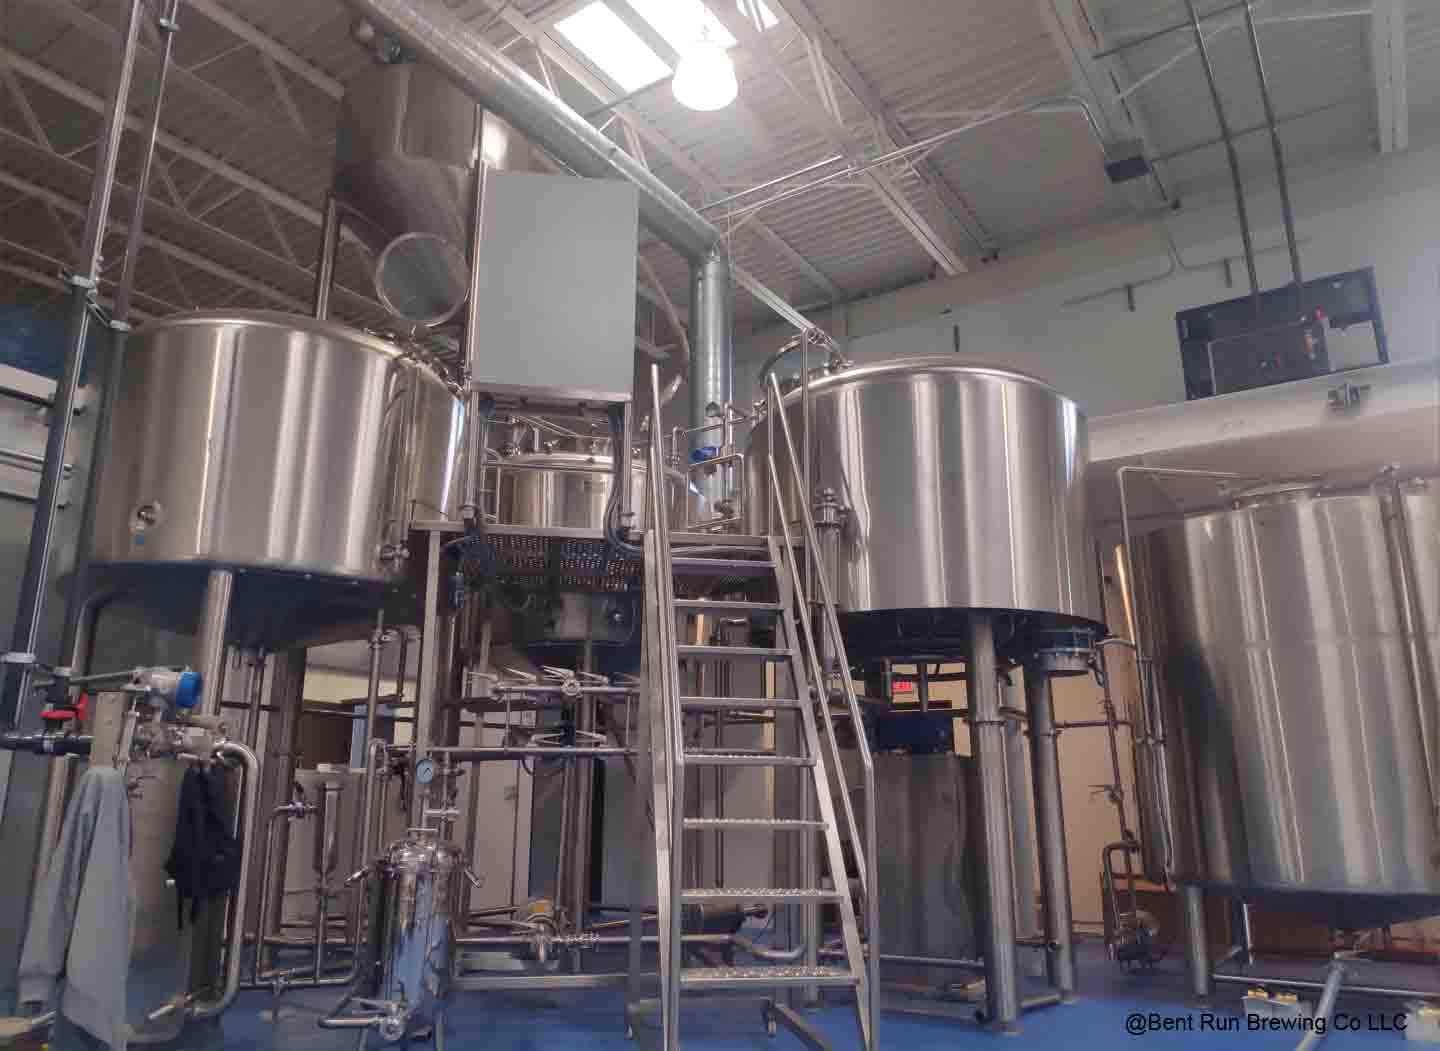 <b>CAN TUNNEL PASTEURIZERS BE PART OF THE BREWERY MANUFACTURING PROCESS?</b>